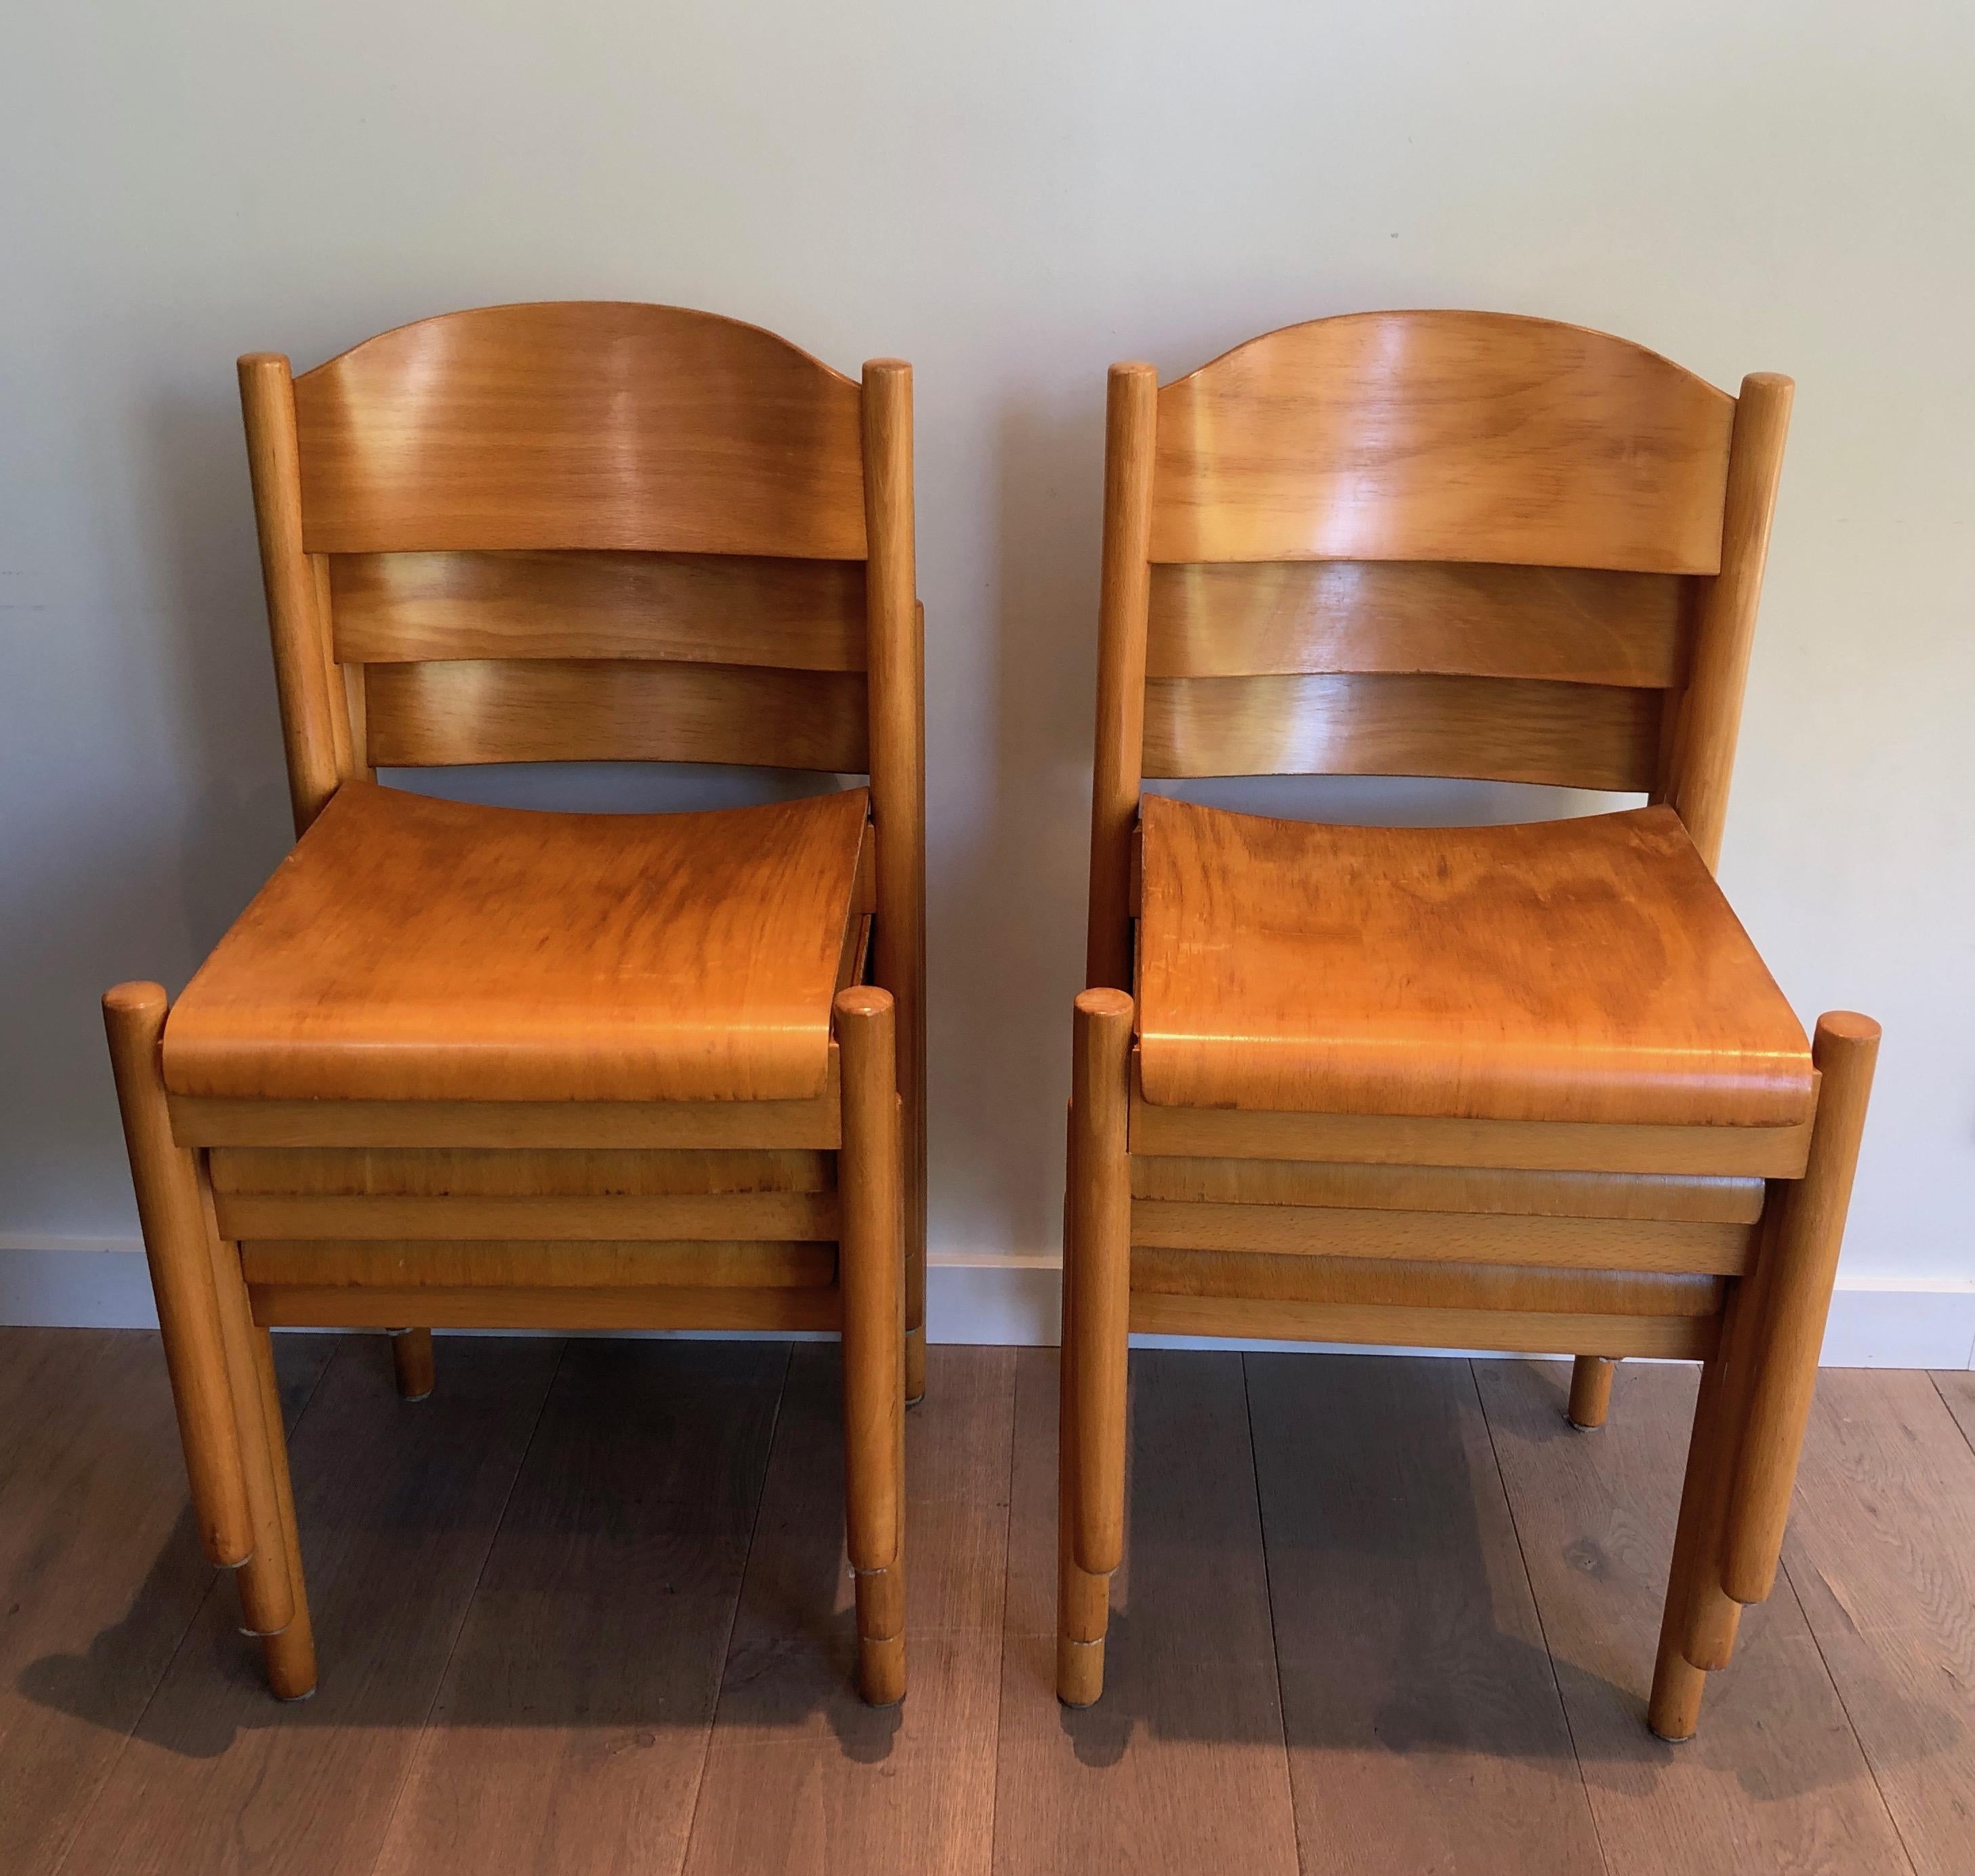 Set of 6 Stackable Pine Chairs, German Work by Karl Klipper, Circa 1970 For Sale 13